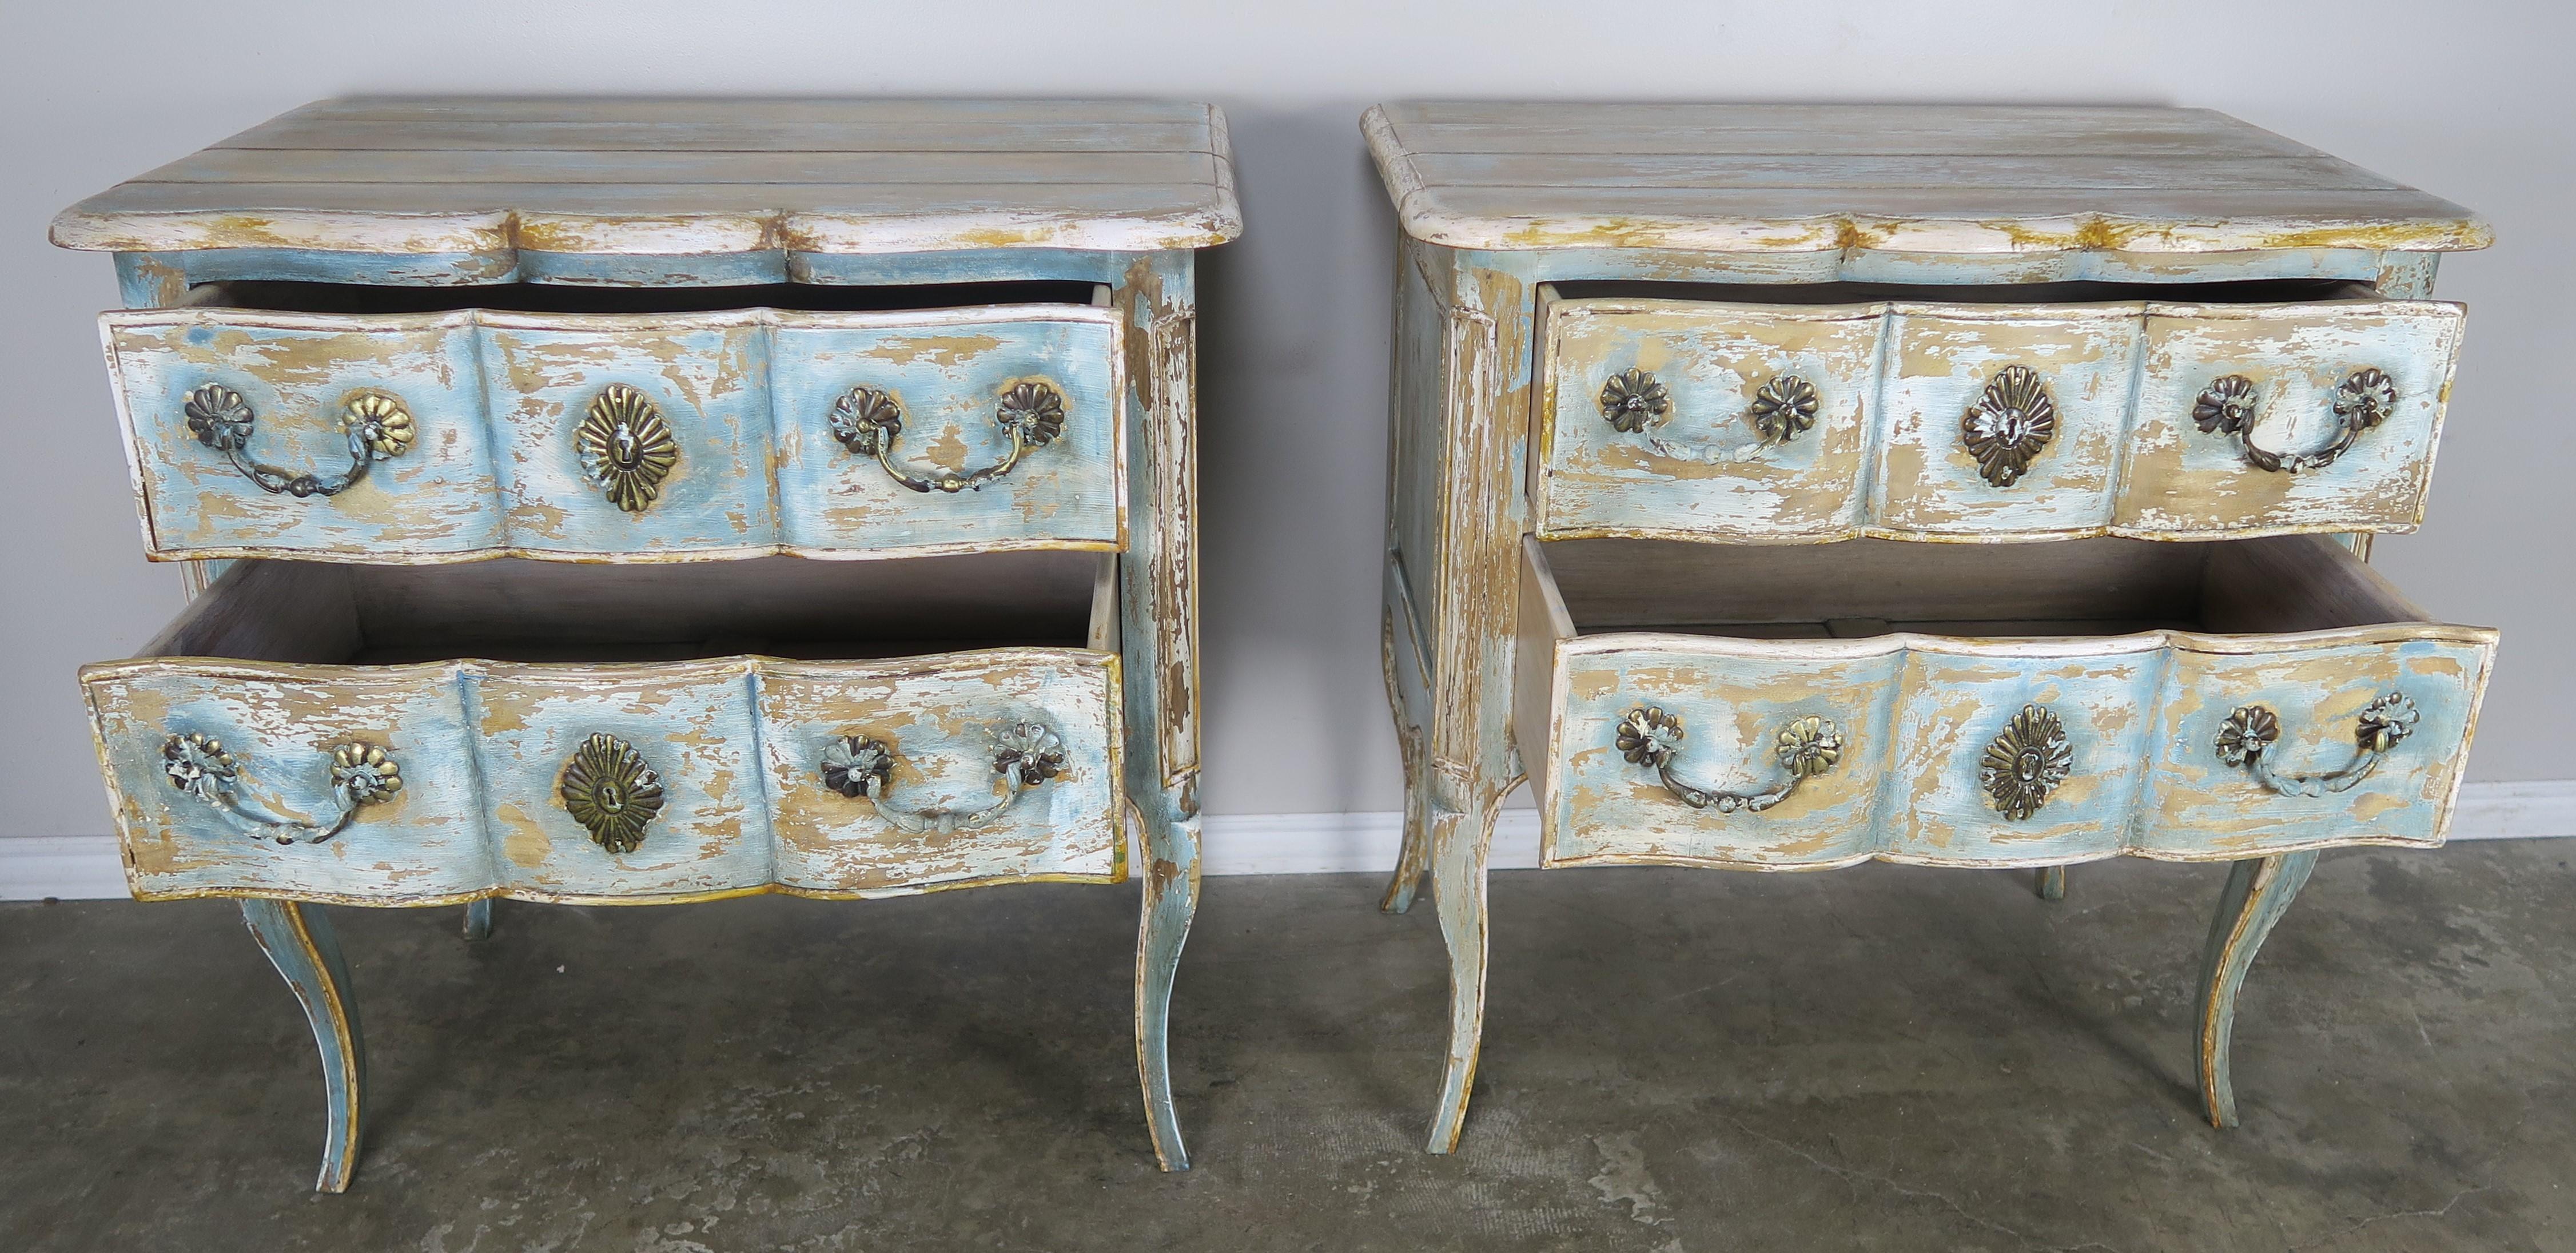 Pair of French painted Louis XV style two drawer commodes that would make perfect night tables, standing on cabriole legs with rams head feet. Beautiful distressed and worn painted finish throughout. Original brass handware.